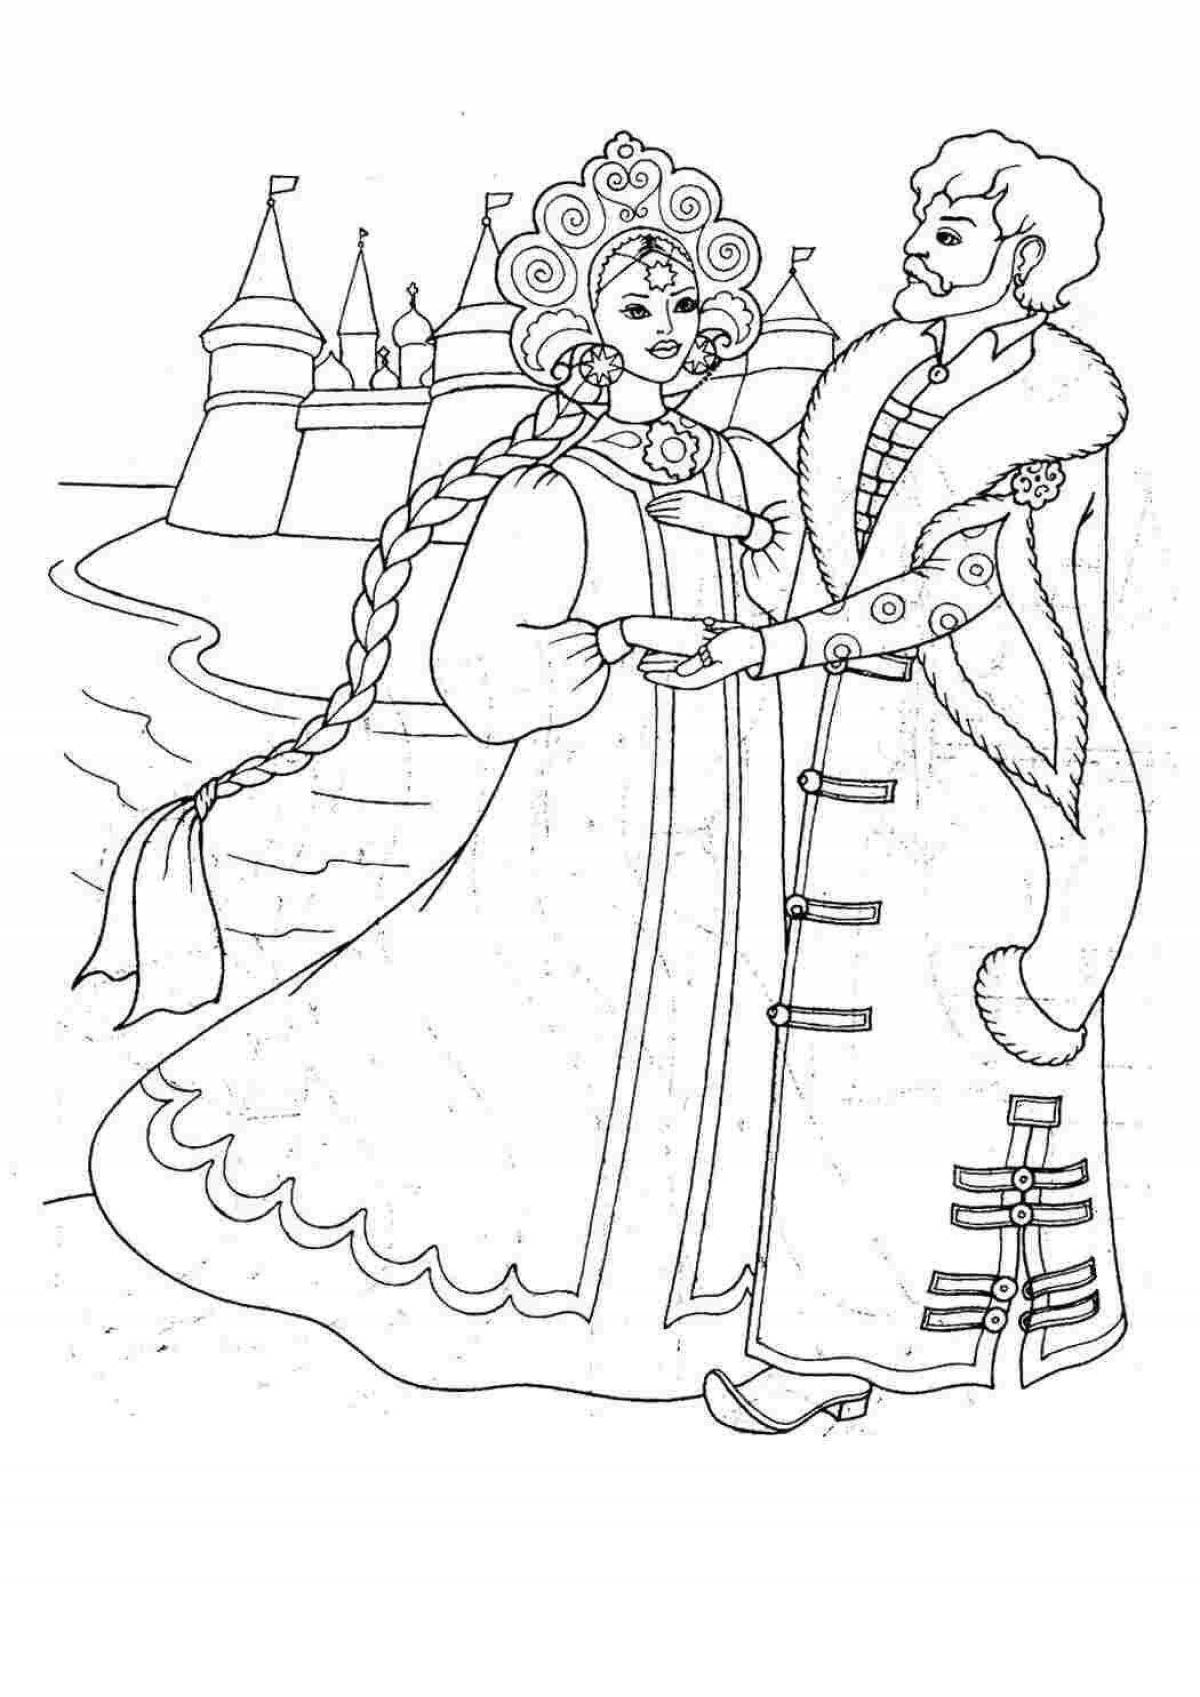 Dazzling coloring book for the tale of Tsar Saltan Grade 3